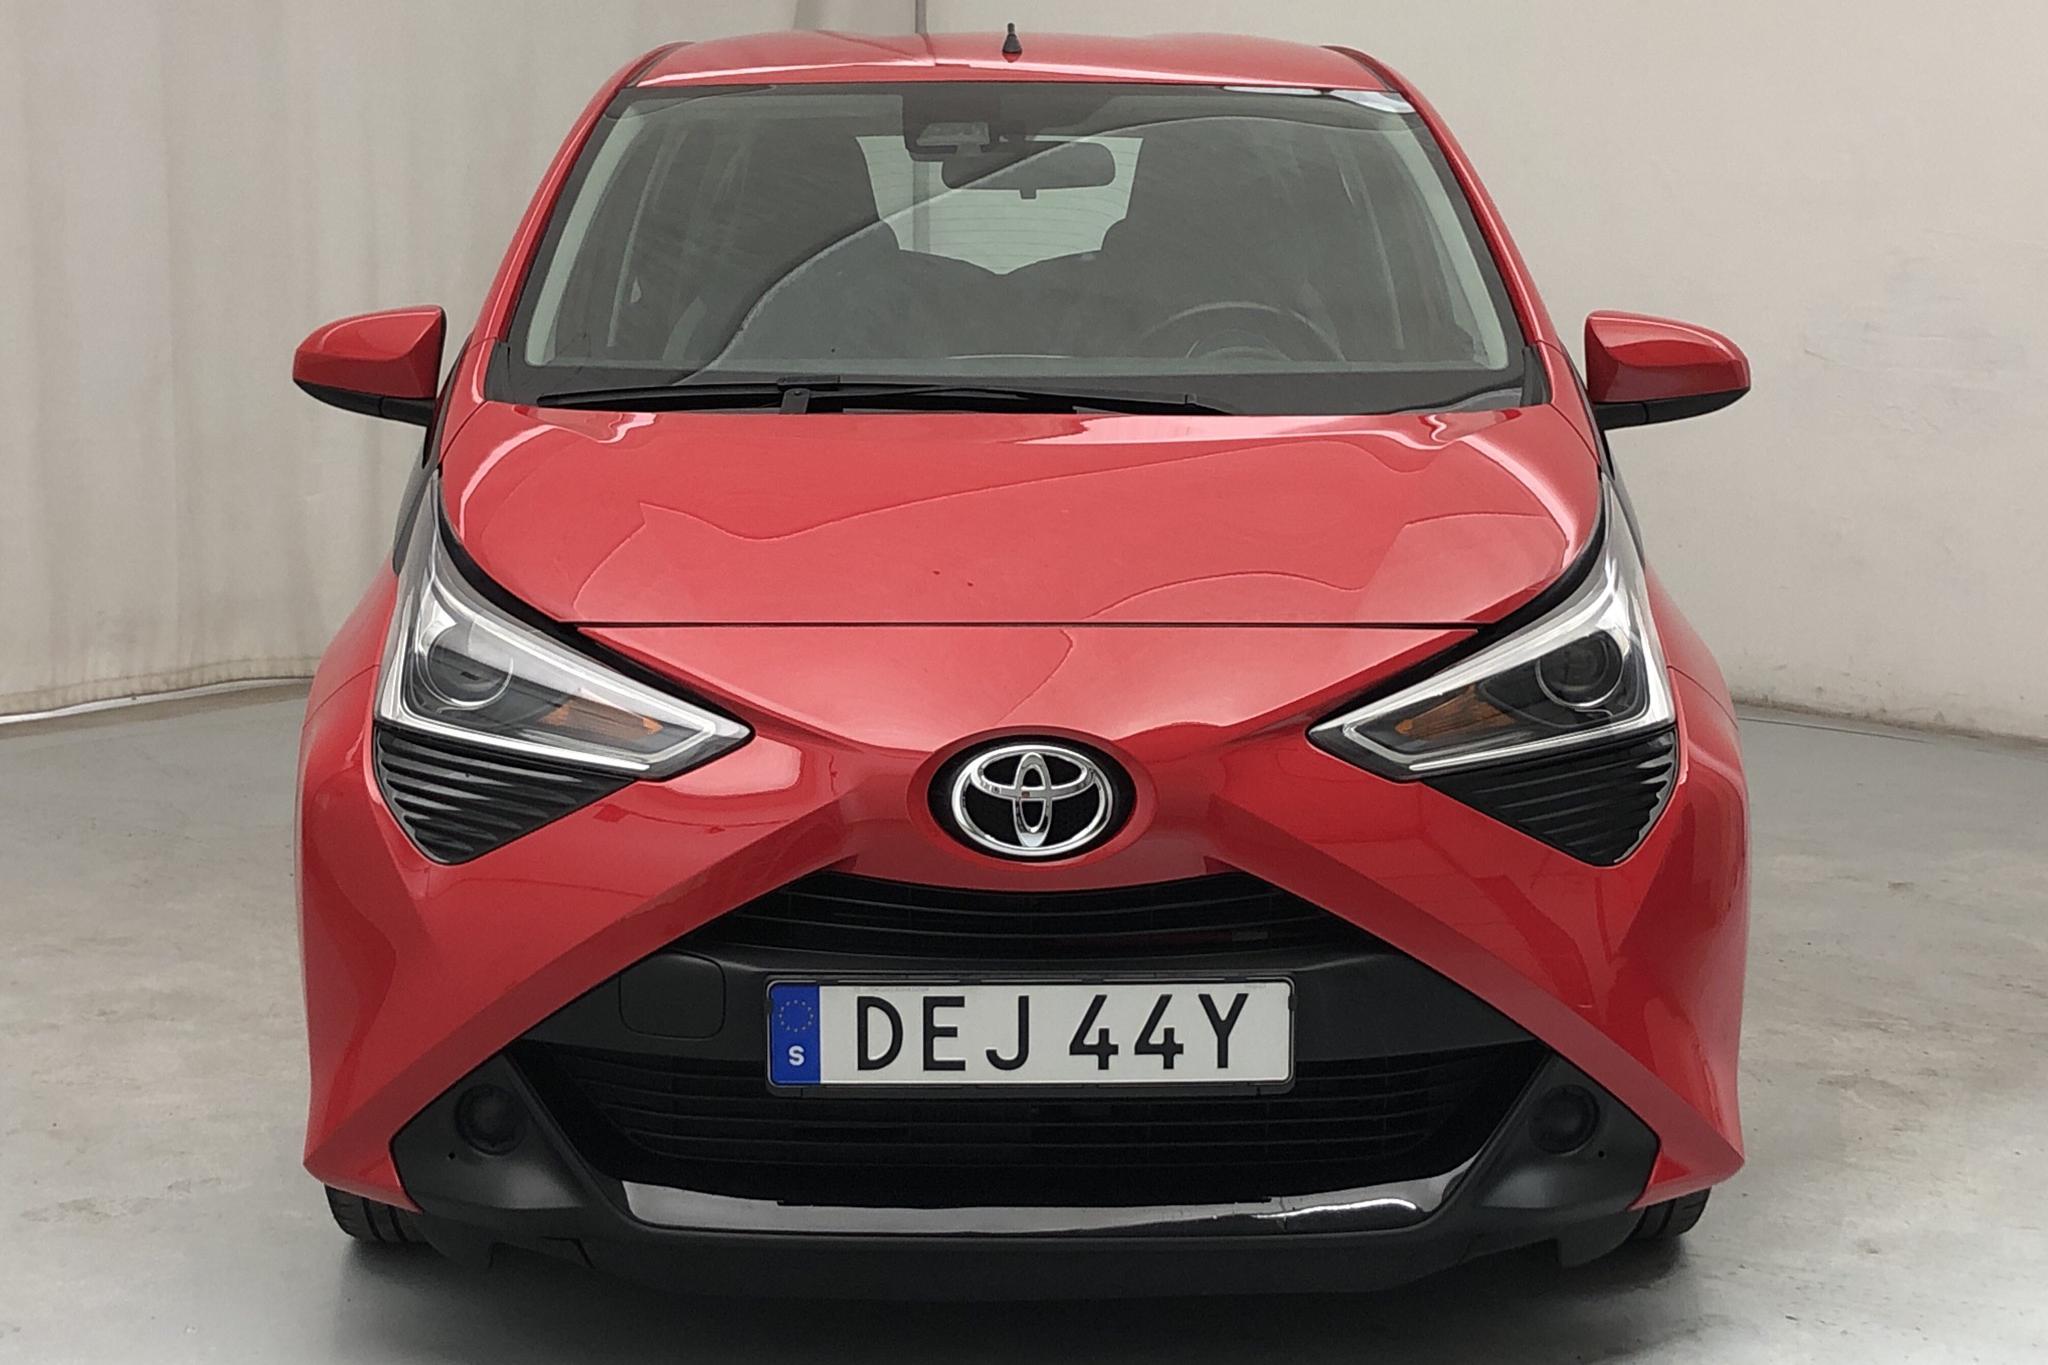 Toyota Aygo 1.0 5dr (72hk) - 59 550 km - Automatic - red - 2019